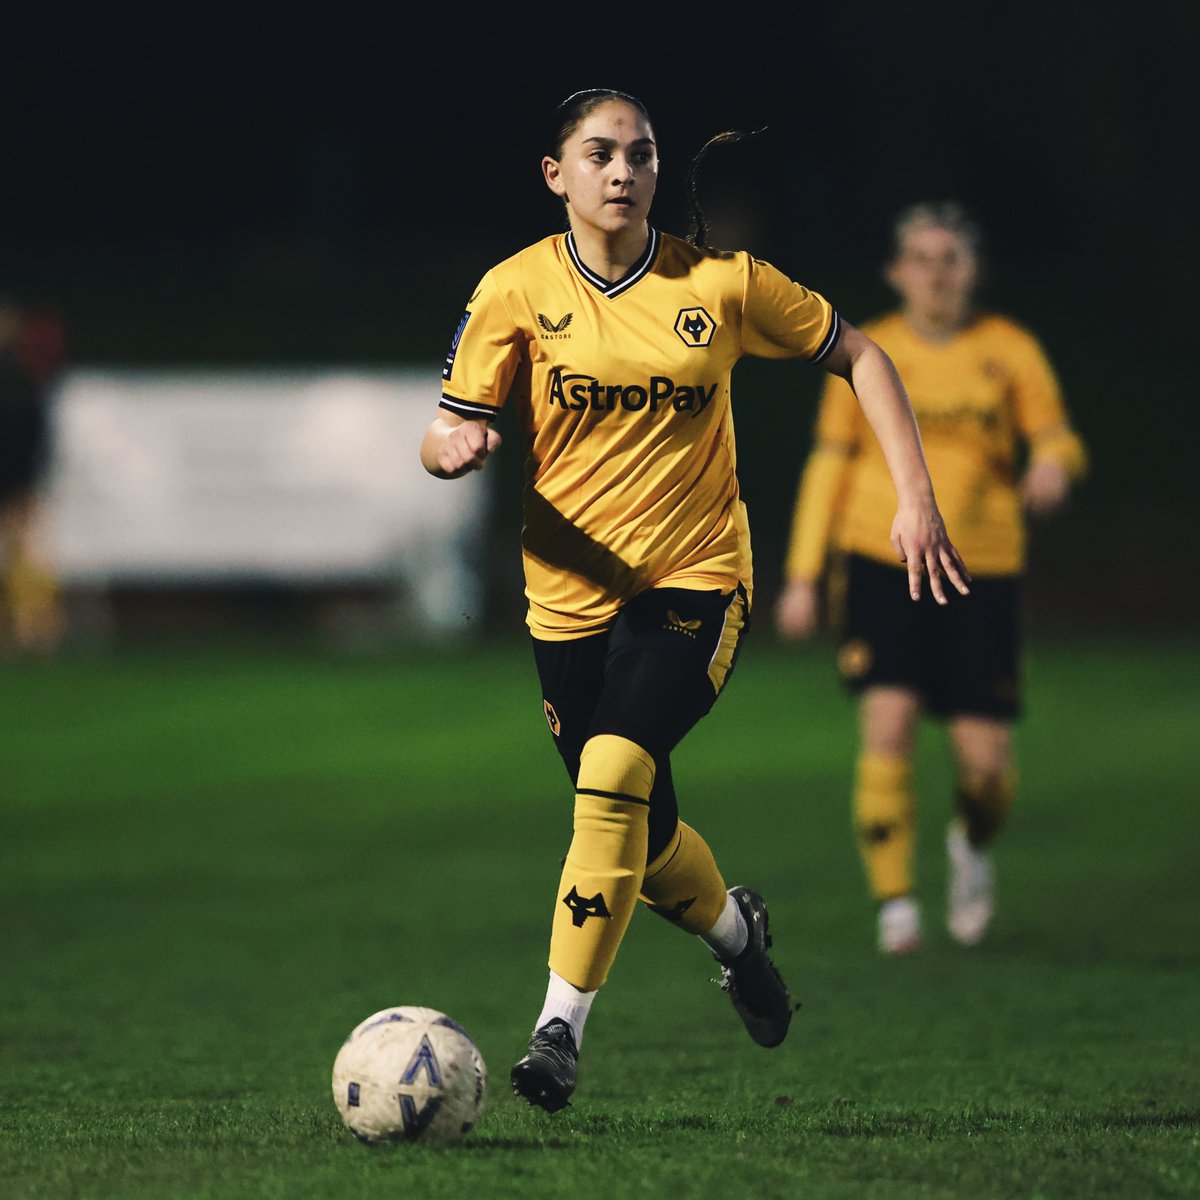 The pleasure has been all ours, @LaylaBanaras! Thank you for giving your all, showcasing your special talent and inspiring us off the pitch 🐺 Wishing you all the success and a bright future 💫